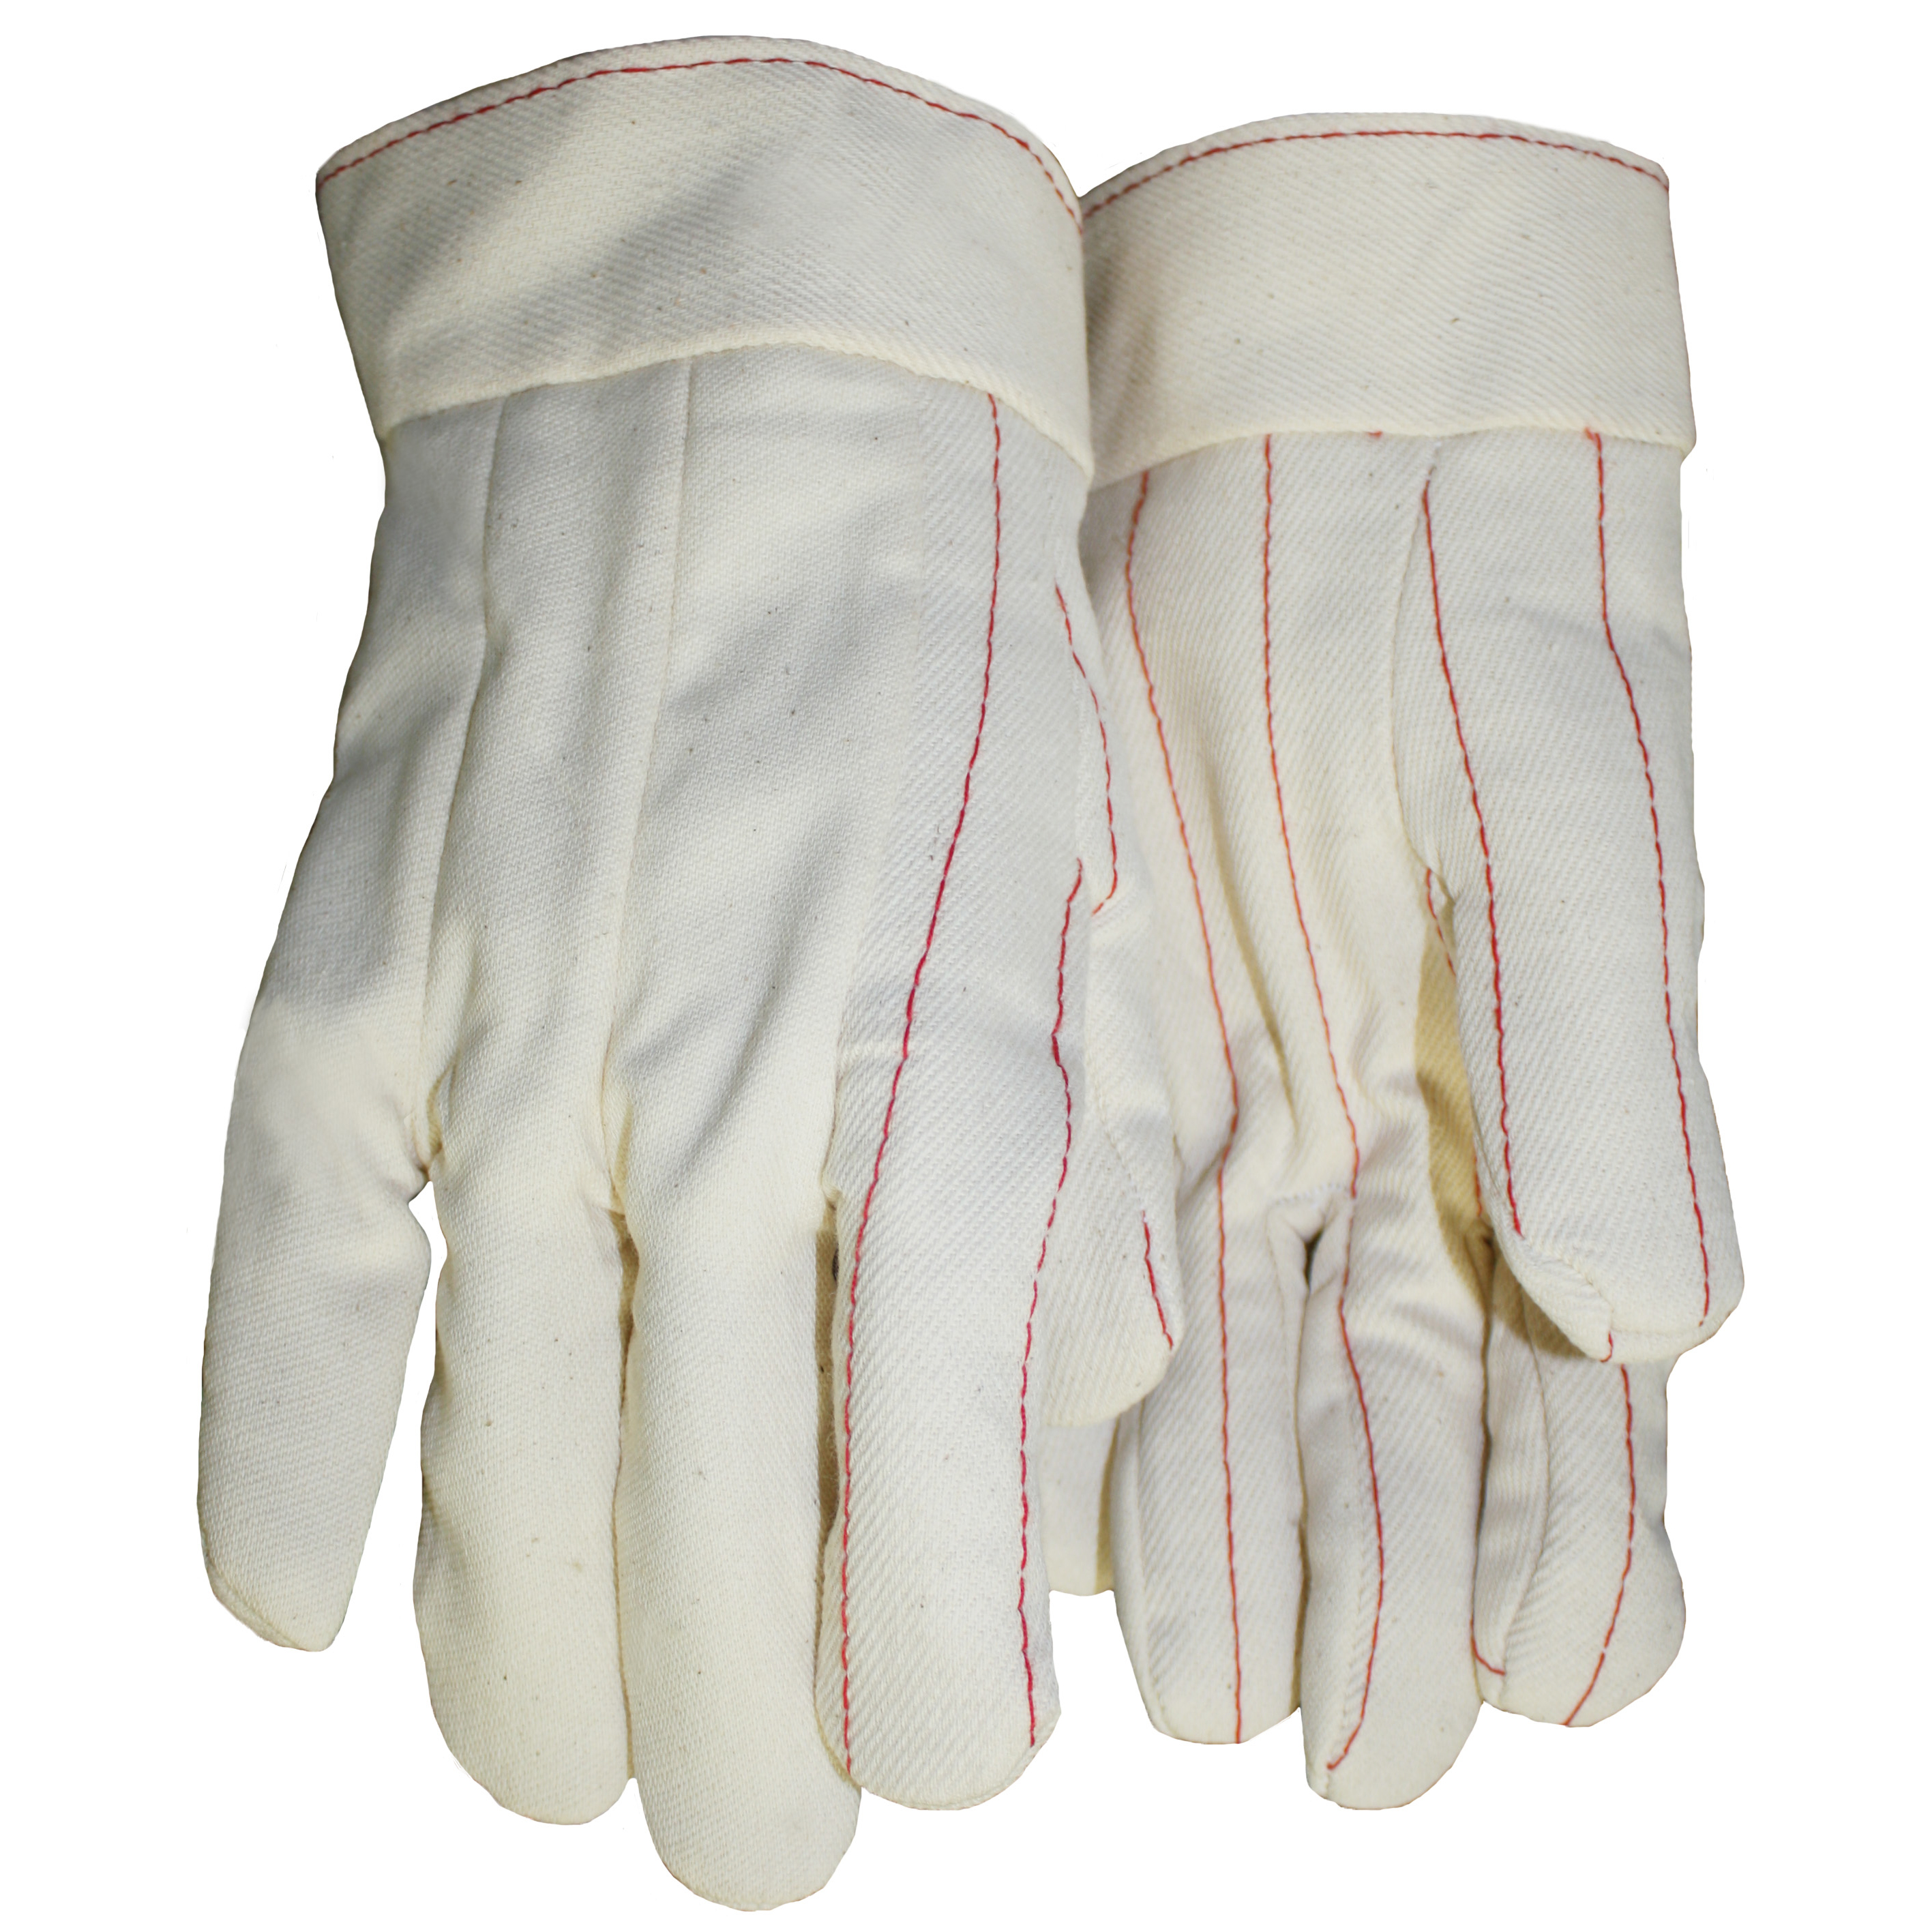 Cotton Double Palm Gloves, Band Top, Made in USA